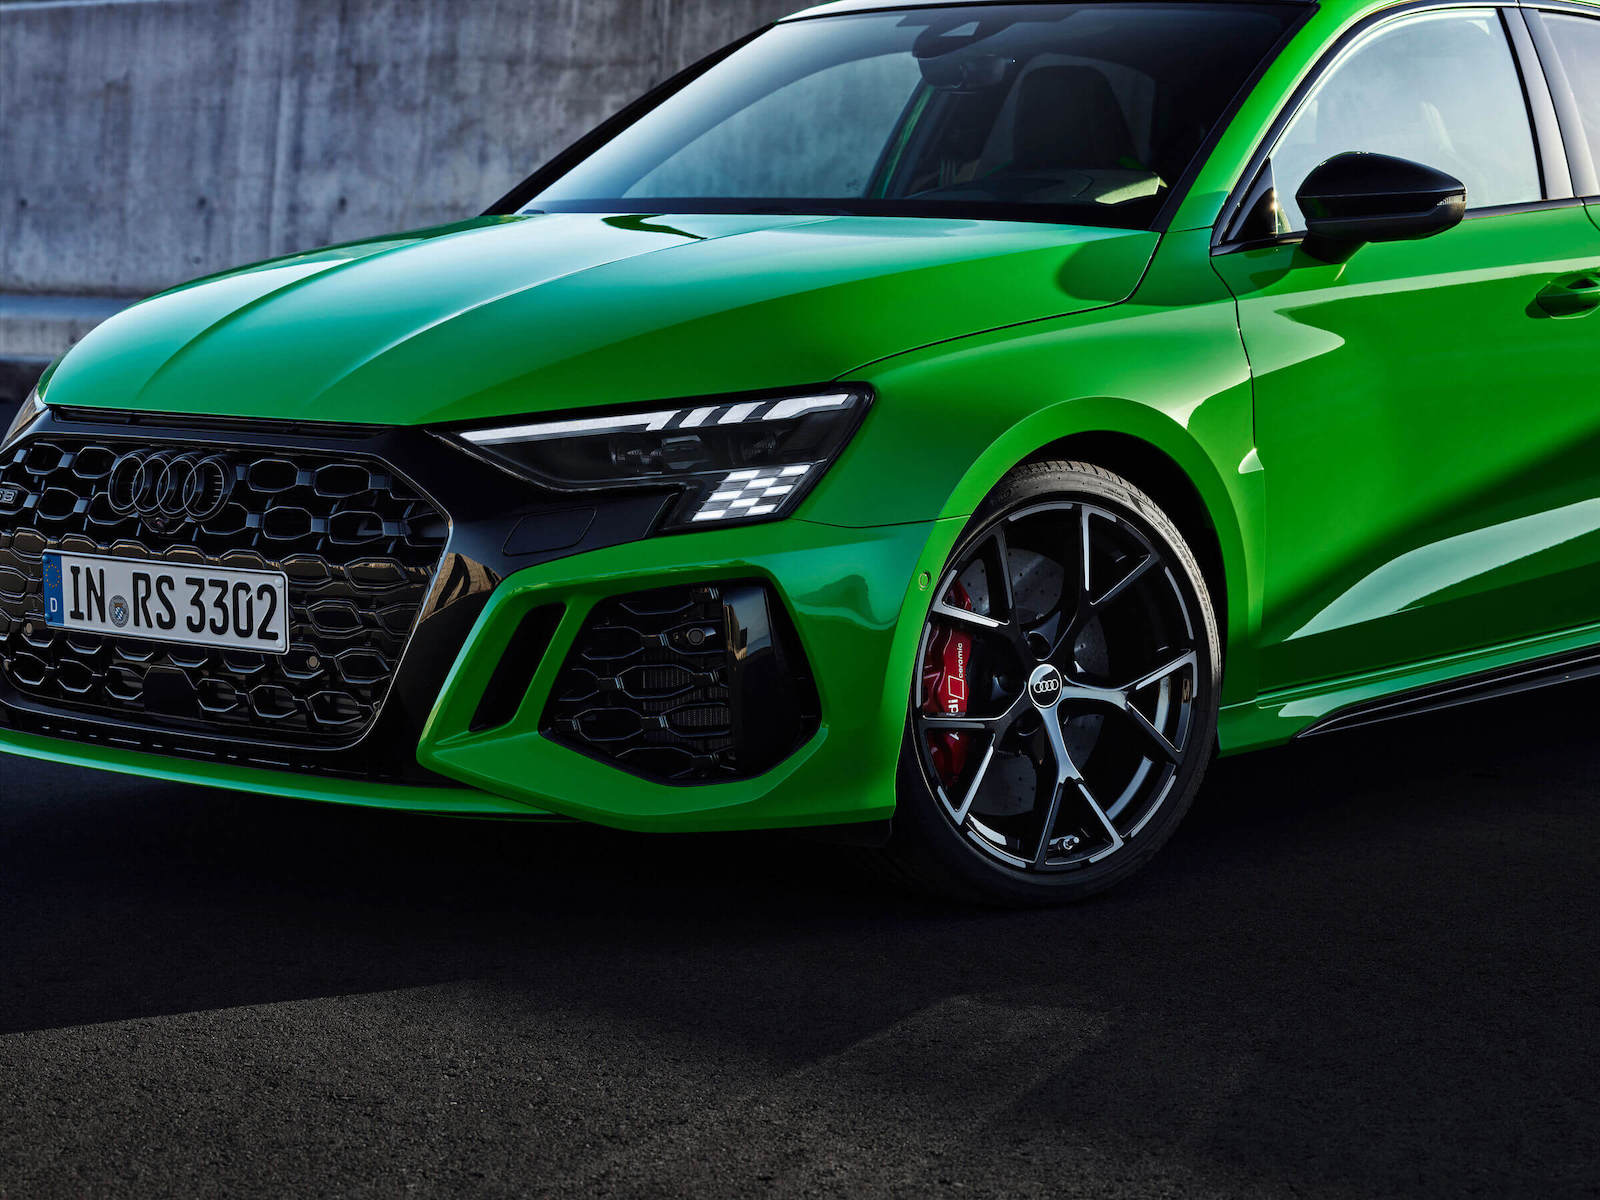 2023 Audi RS 3 with checkered flag headlight design